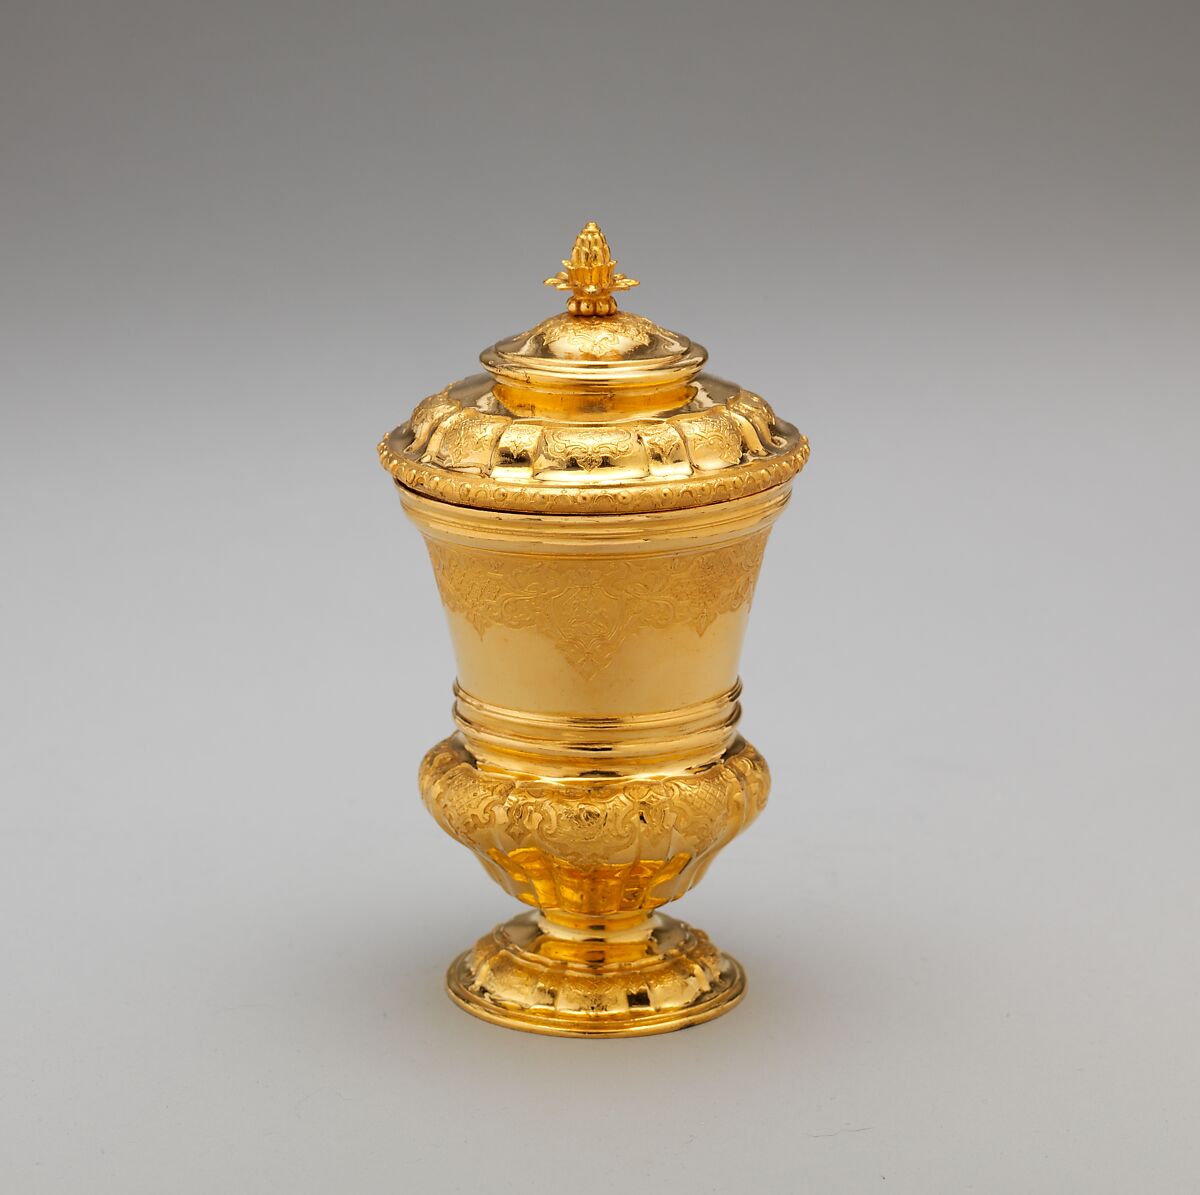 Cup with cover, After an original by Johann Ludwig Biller (1692–1746), Gold, British, Birmingham, after German, Augsburg original 